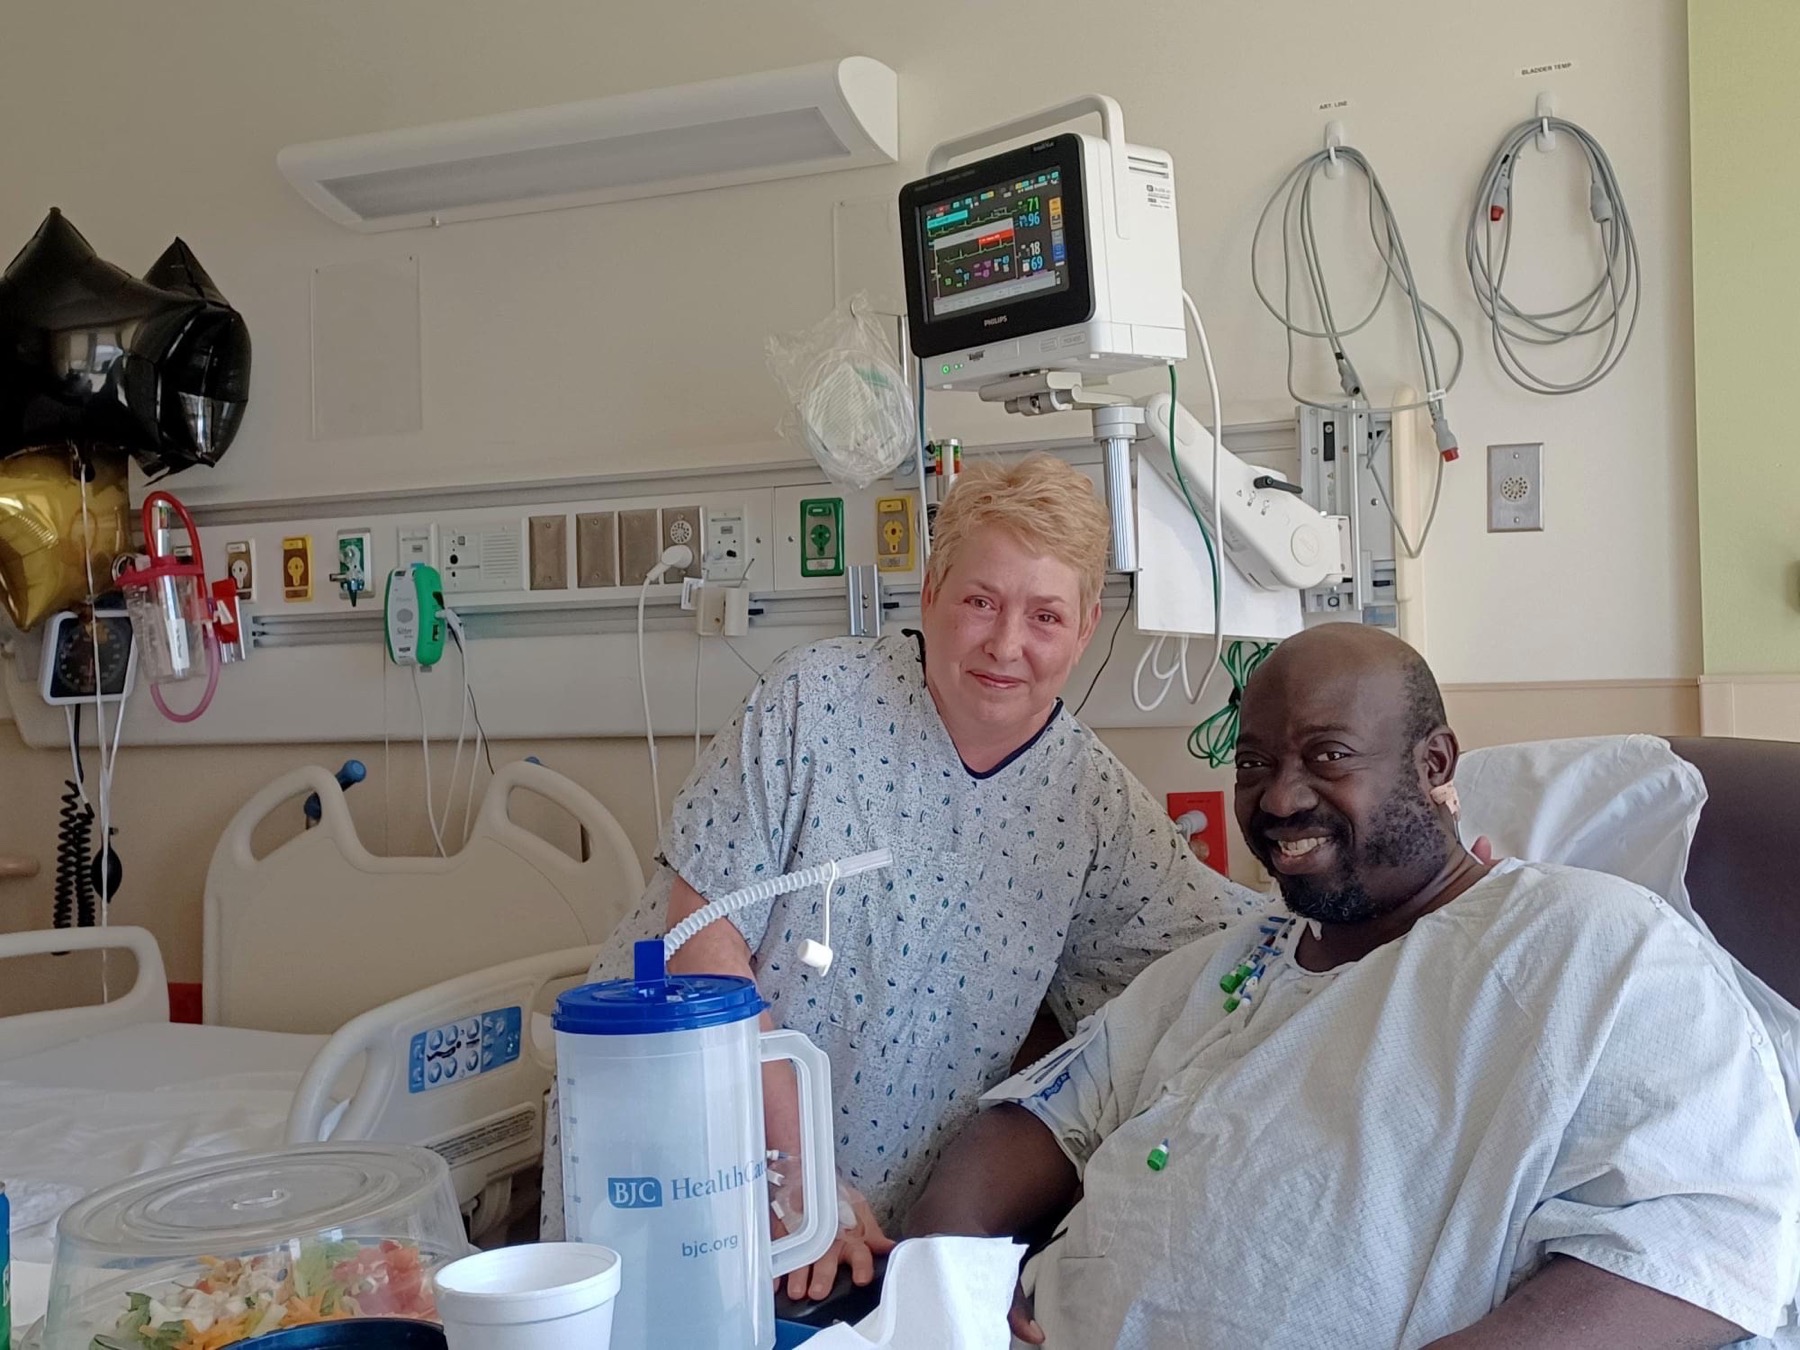 an older black man and an older white woman in hospital gowns in a hospital room smile at the camera. the man is sitting down while the woman is standing